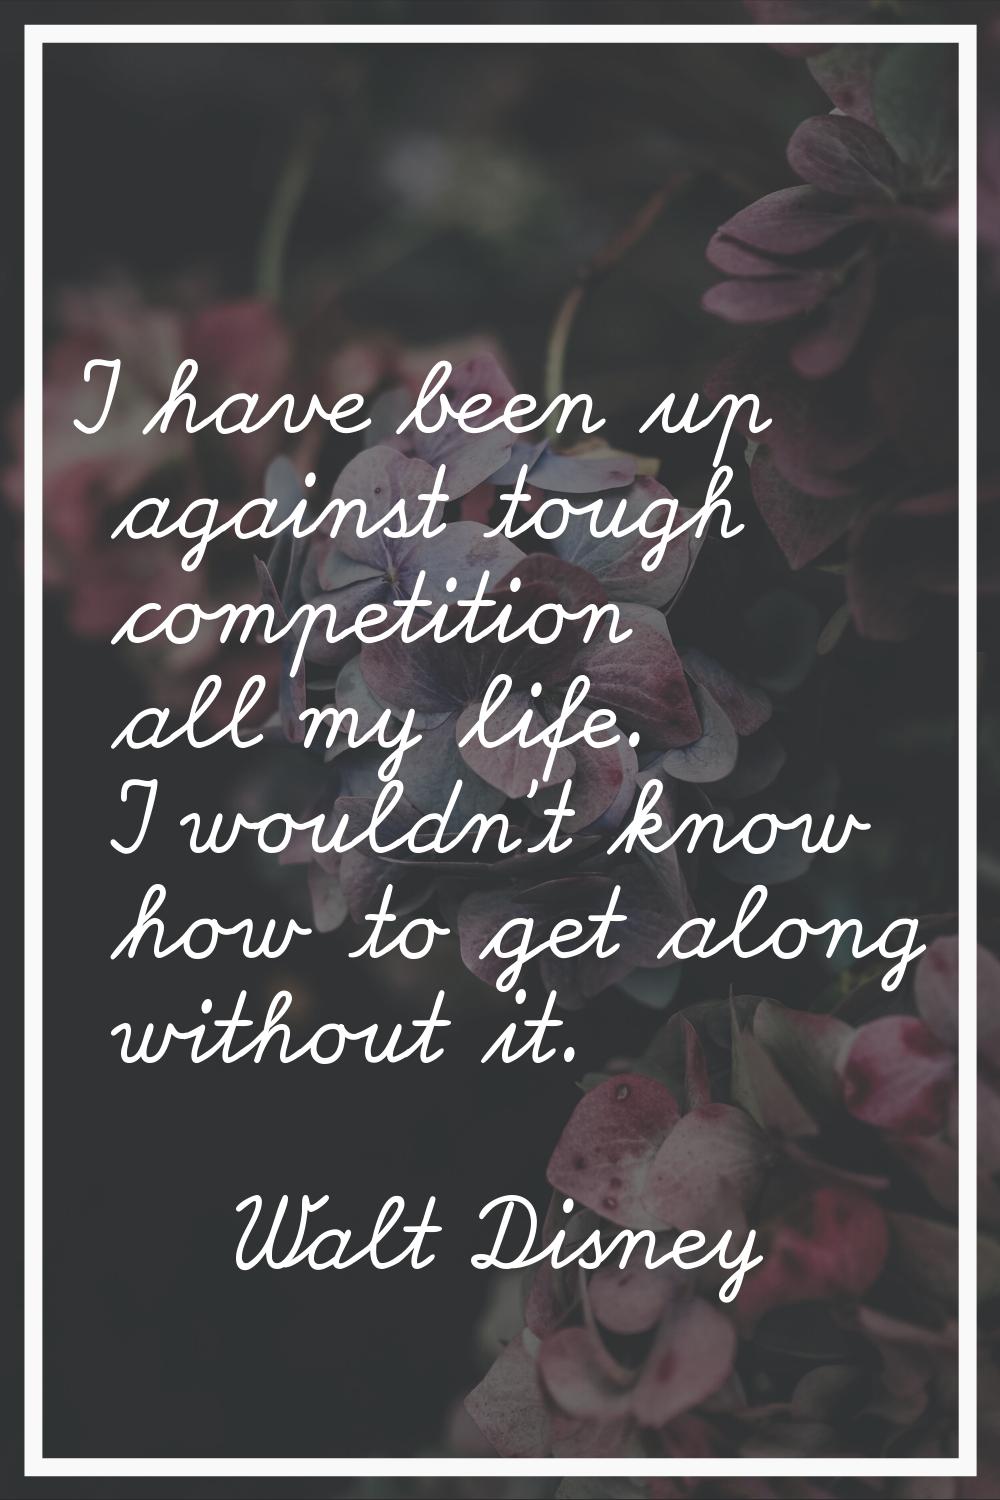 I have been up against tough competition all my life. I wouldn't know how to get along without it.